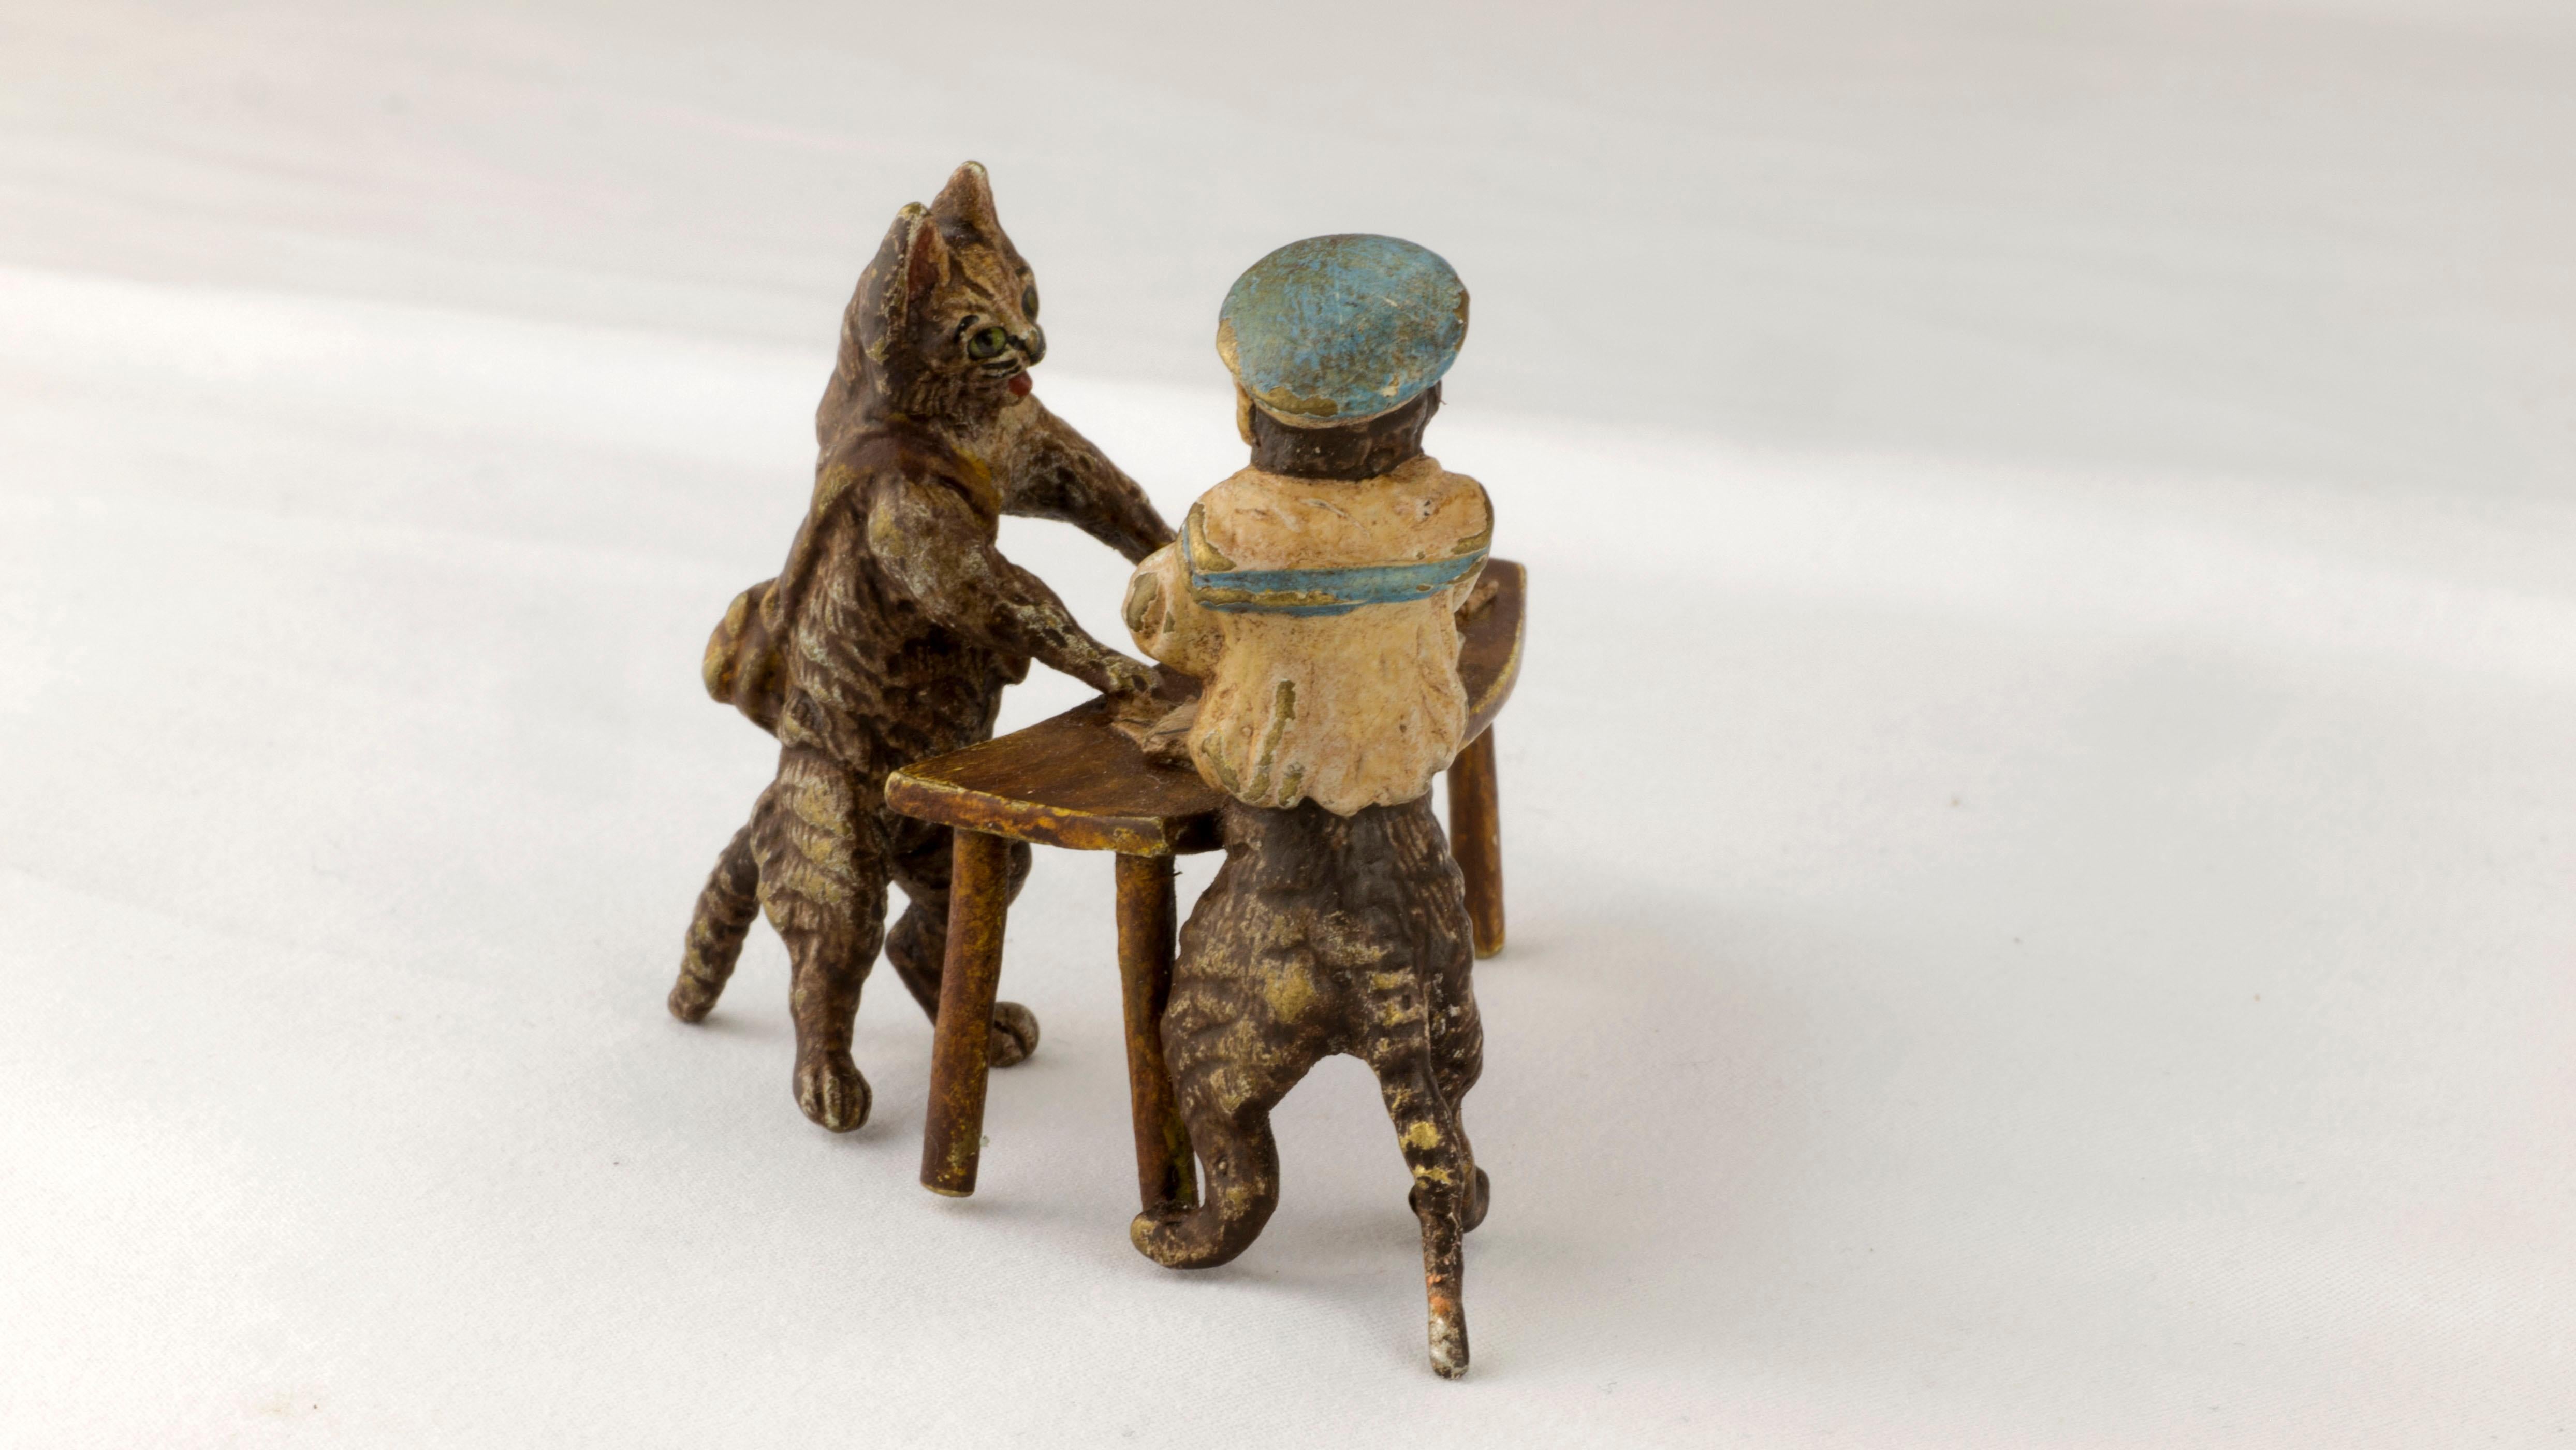 Introducing a delightful antique piece, the Gorgeous Vienna Bronze Figurine Group crafted by the famous Bergman(n) manufactory during the late 19th century, circa 1890-1900.

This charming bronze figurine group depicts Postal Carrier Cat standing